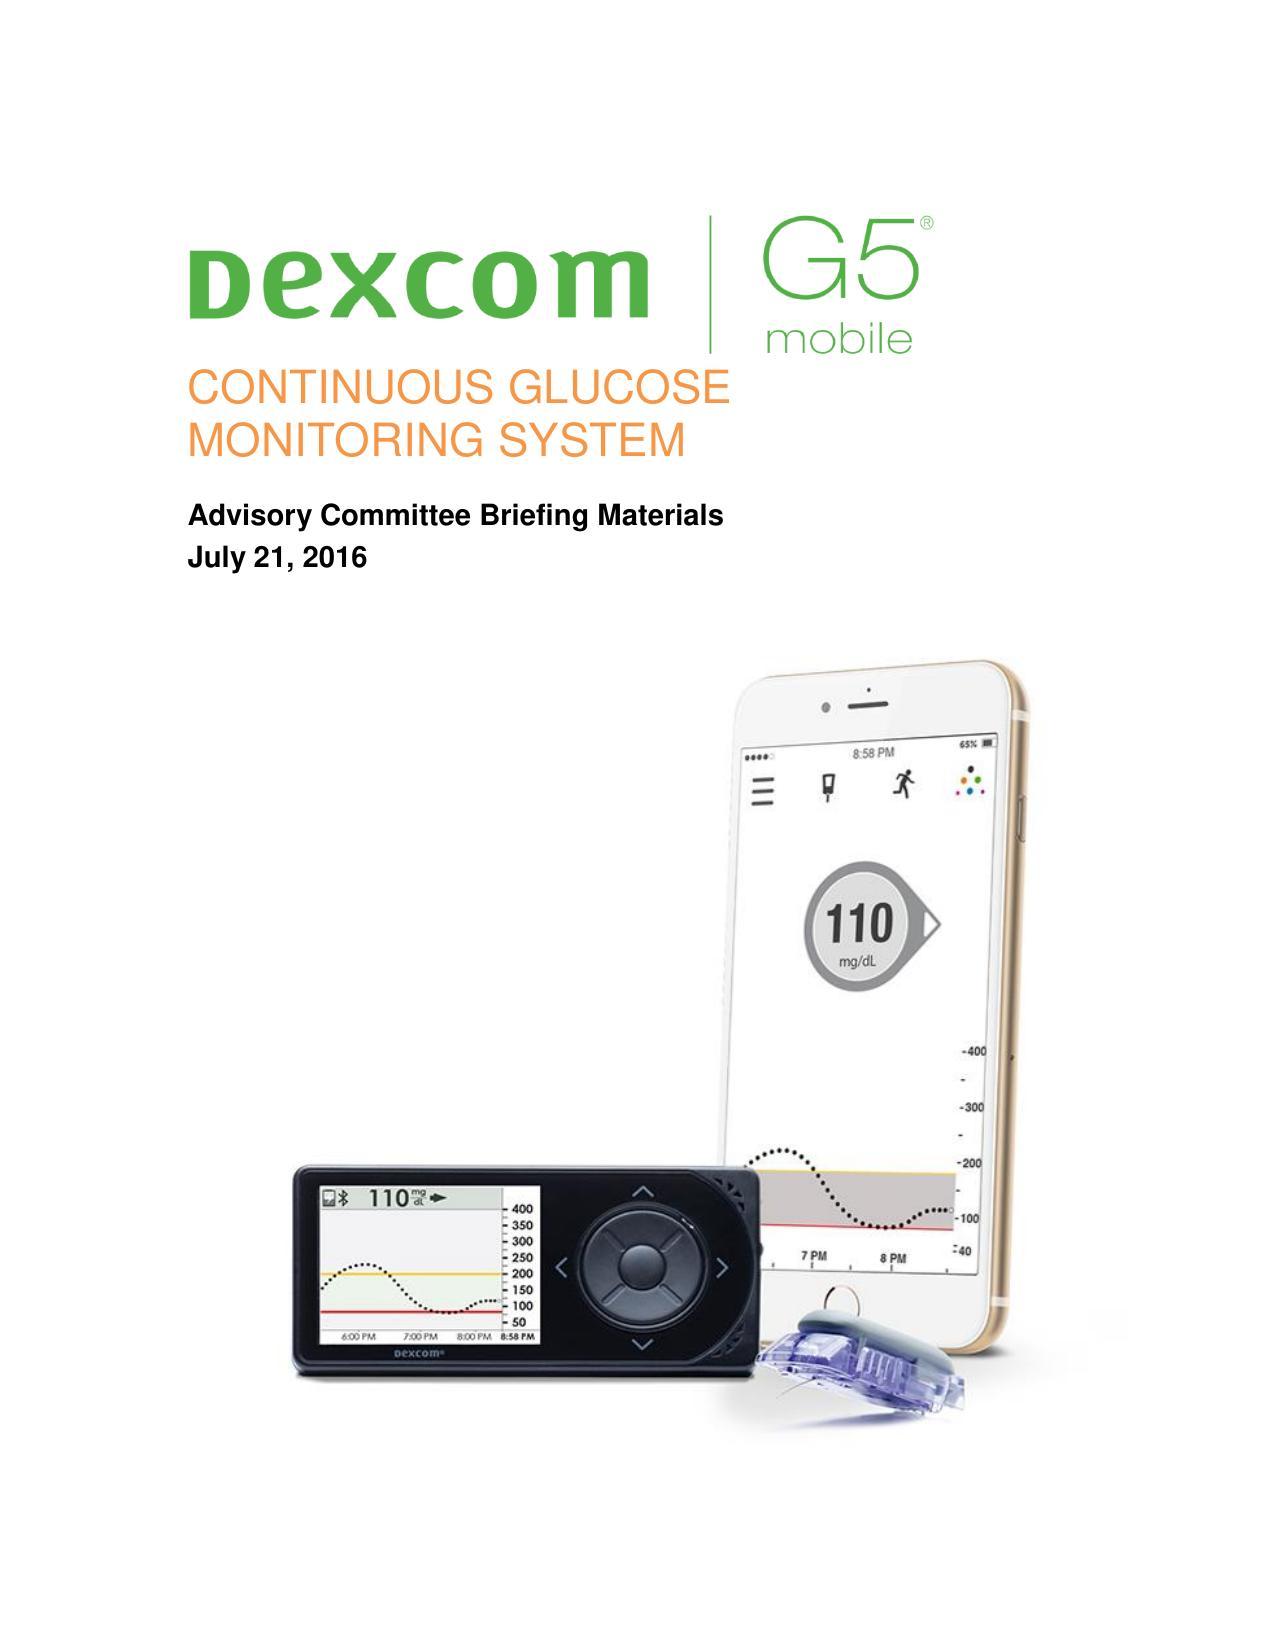 dexcom-g5-mobile-continuous-glucose-monitoring-system-advisory-committee-briefing-materials.pdf